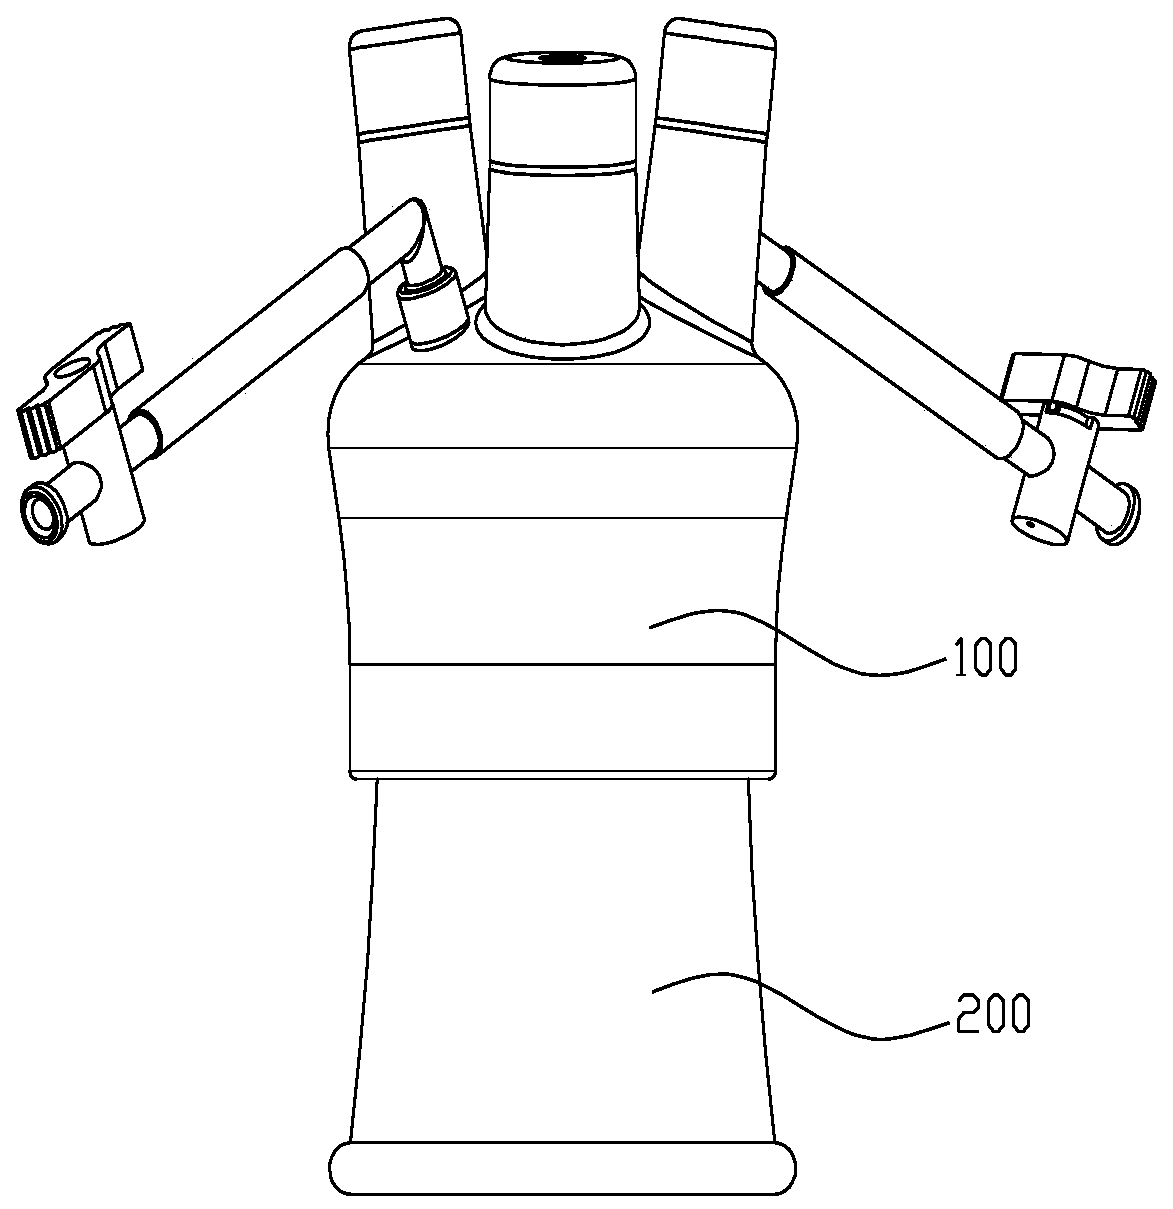 Sealing cover, incision protective sleeve and operation device